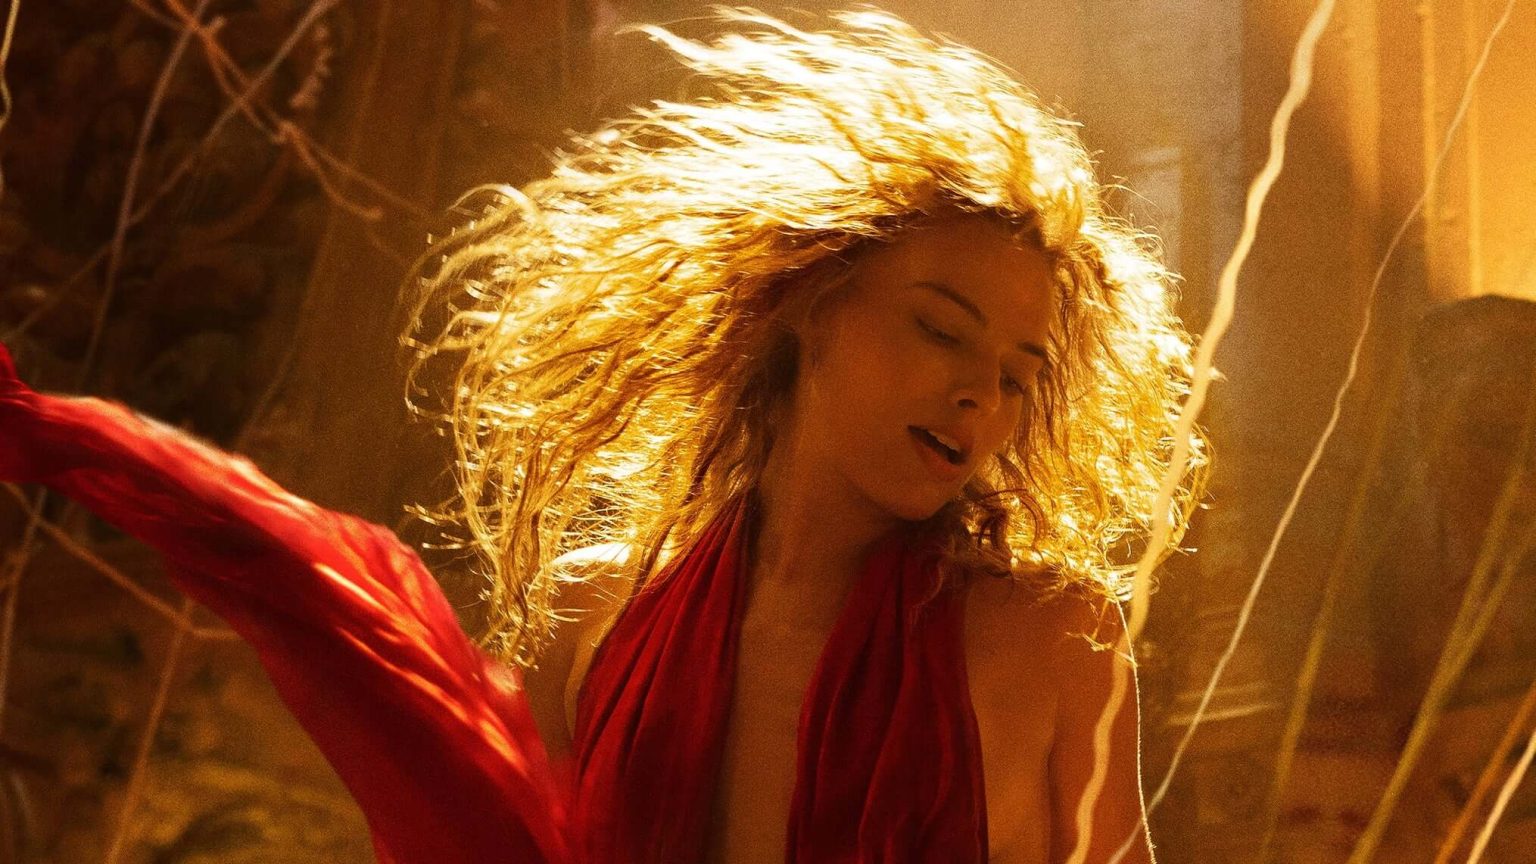 A movie star flicks their long hair, backlit by a strong light